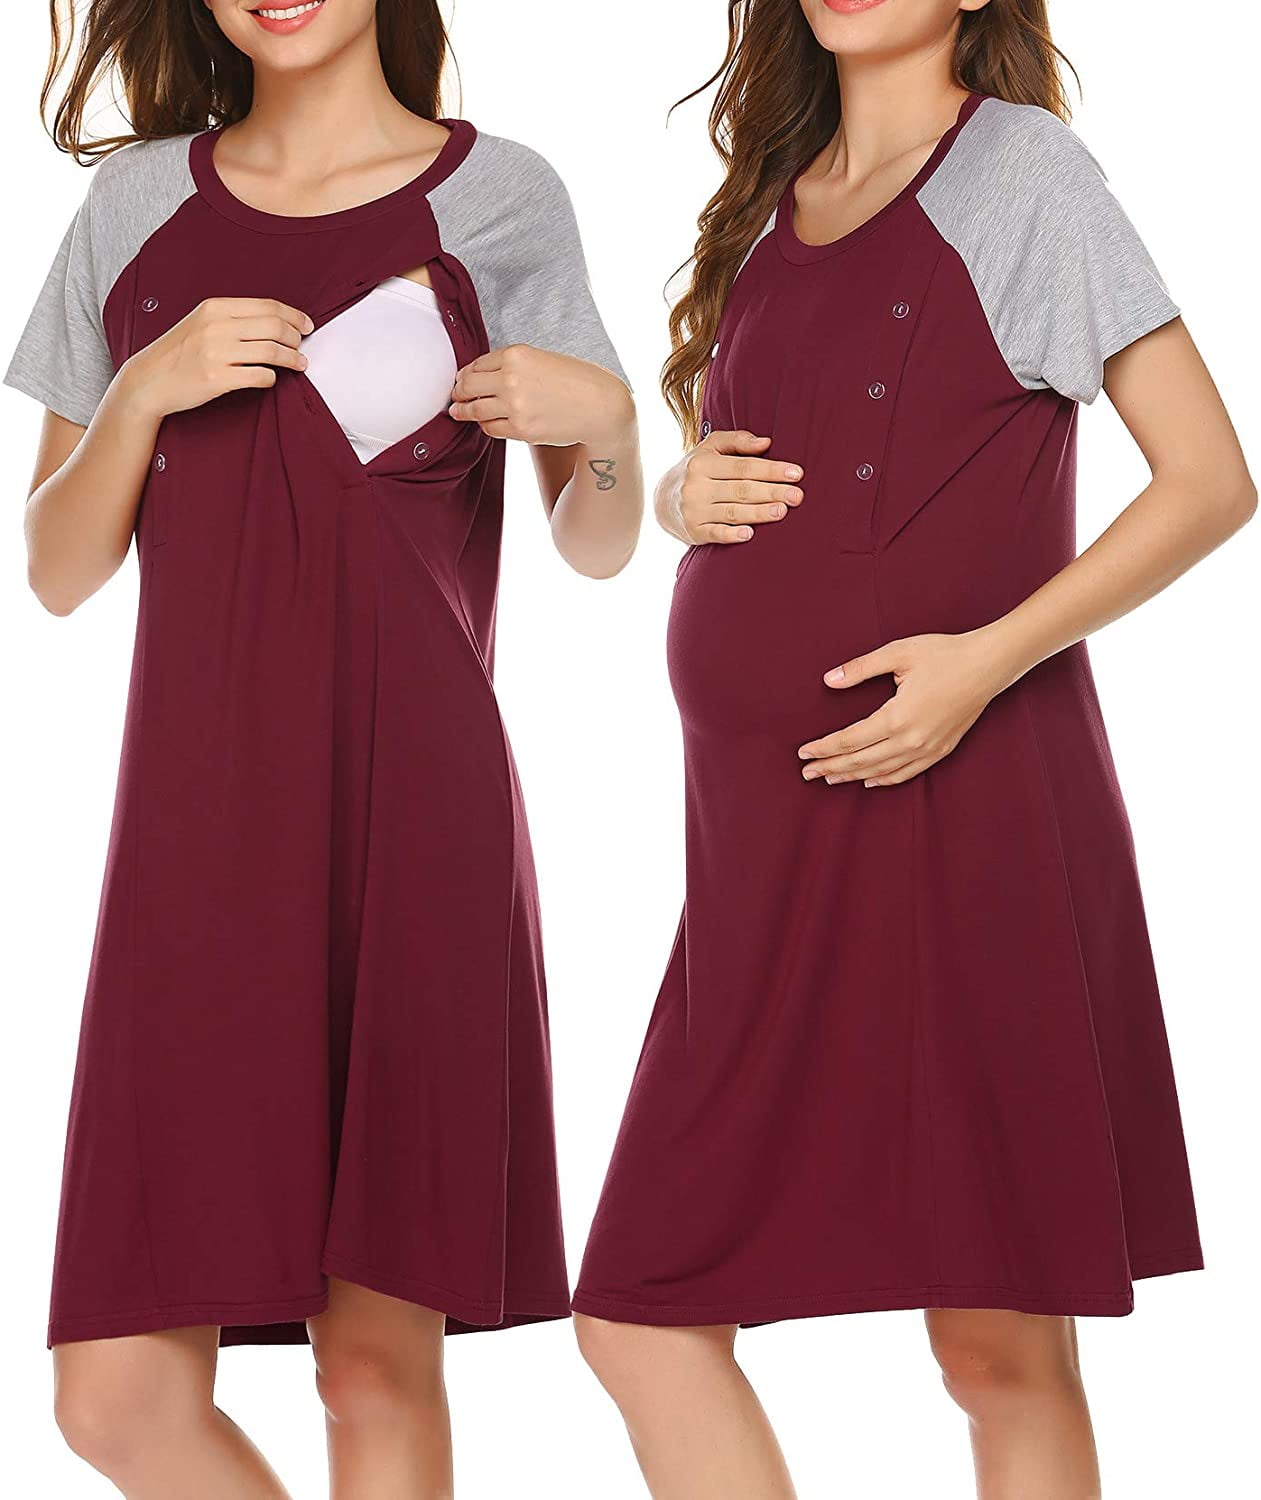 Women Maternity Hospital Gown 3-in-1 Hospital Gown for Labor and Delivery Nursing Nightgown Breastfeeding Dress